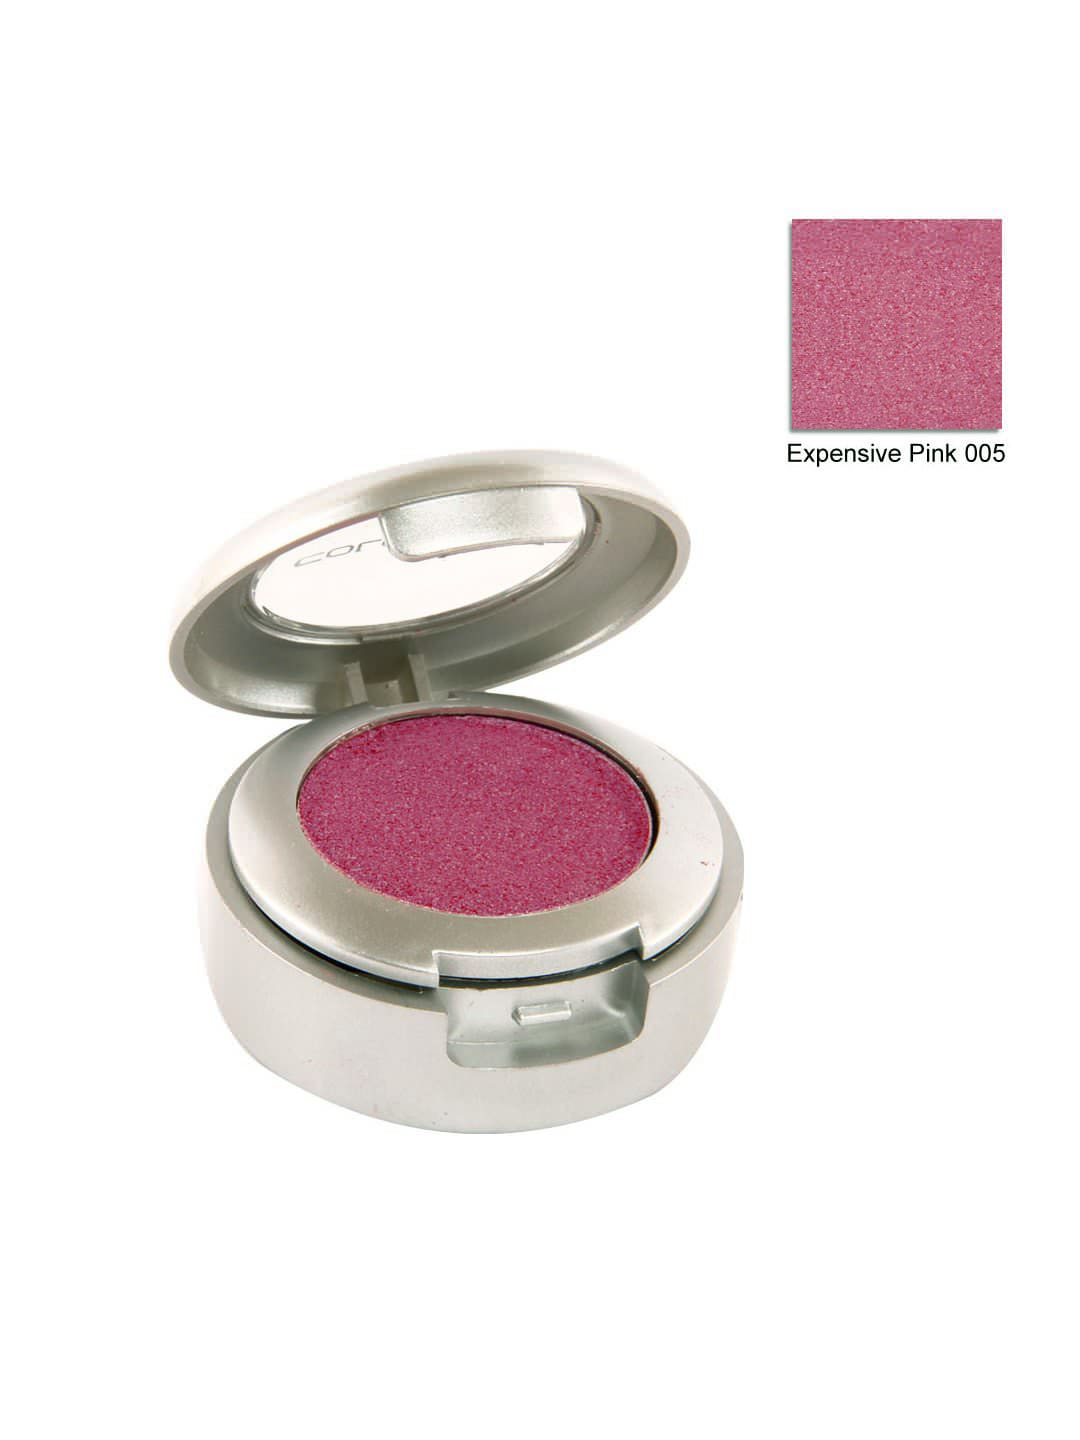 Colorbar Expensive Pink Eye Shadow 005